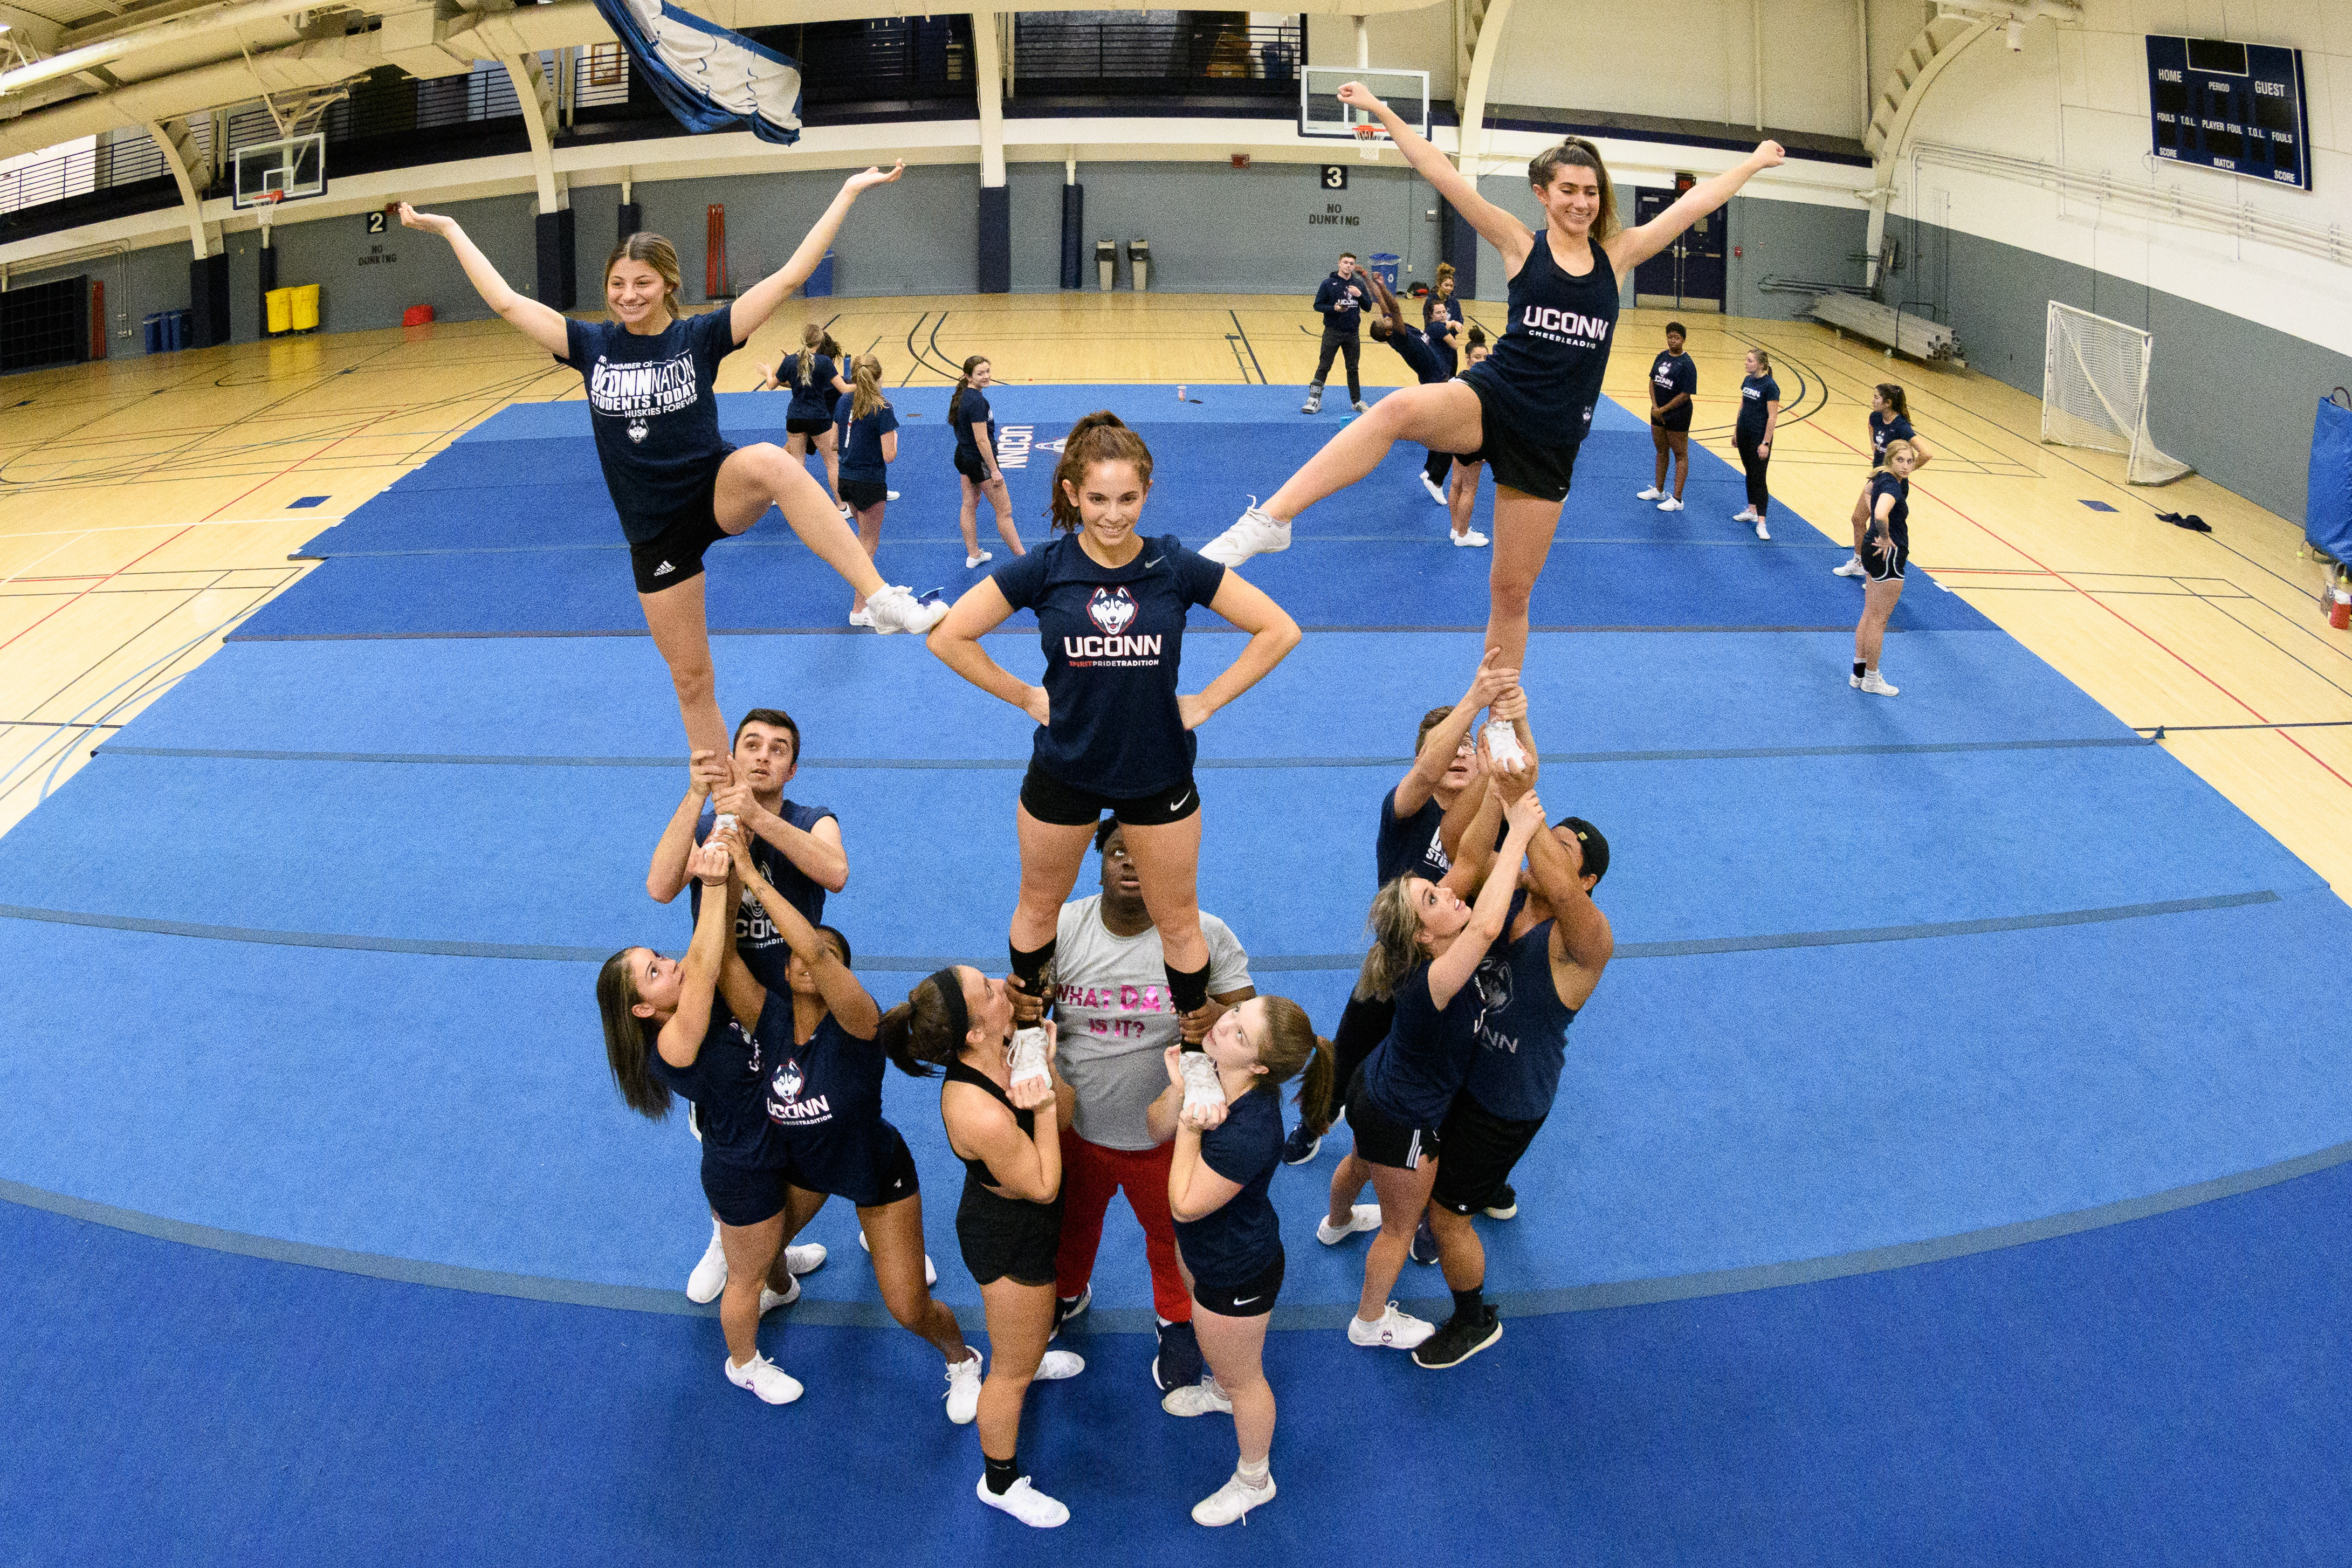 Cheerleaders practicing a routine.